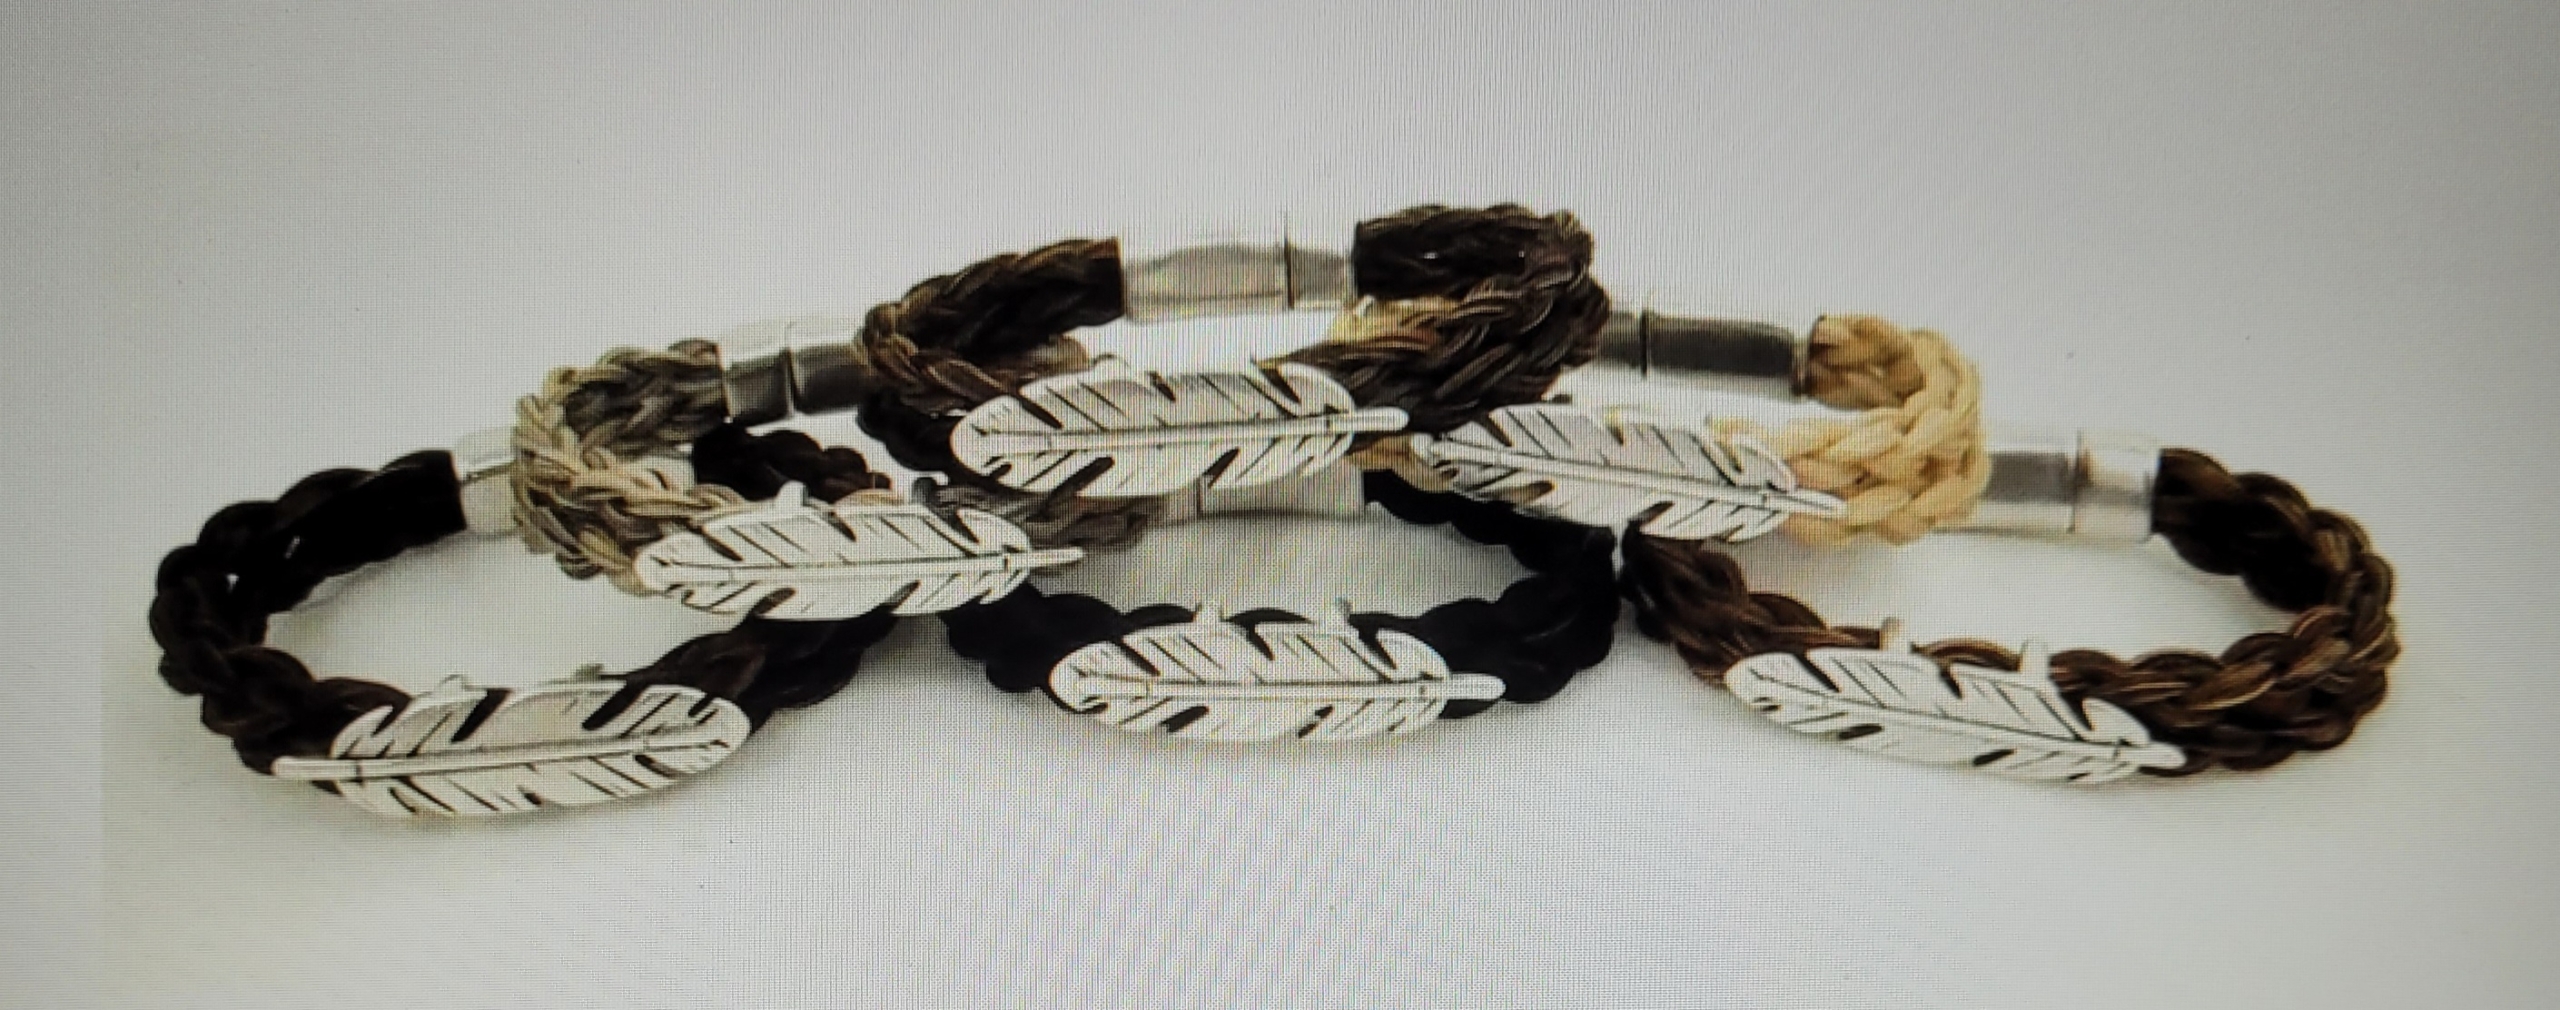 A Symbolic Feather on this Horse Hair Bracelet - Corolla Wild Horse Fund